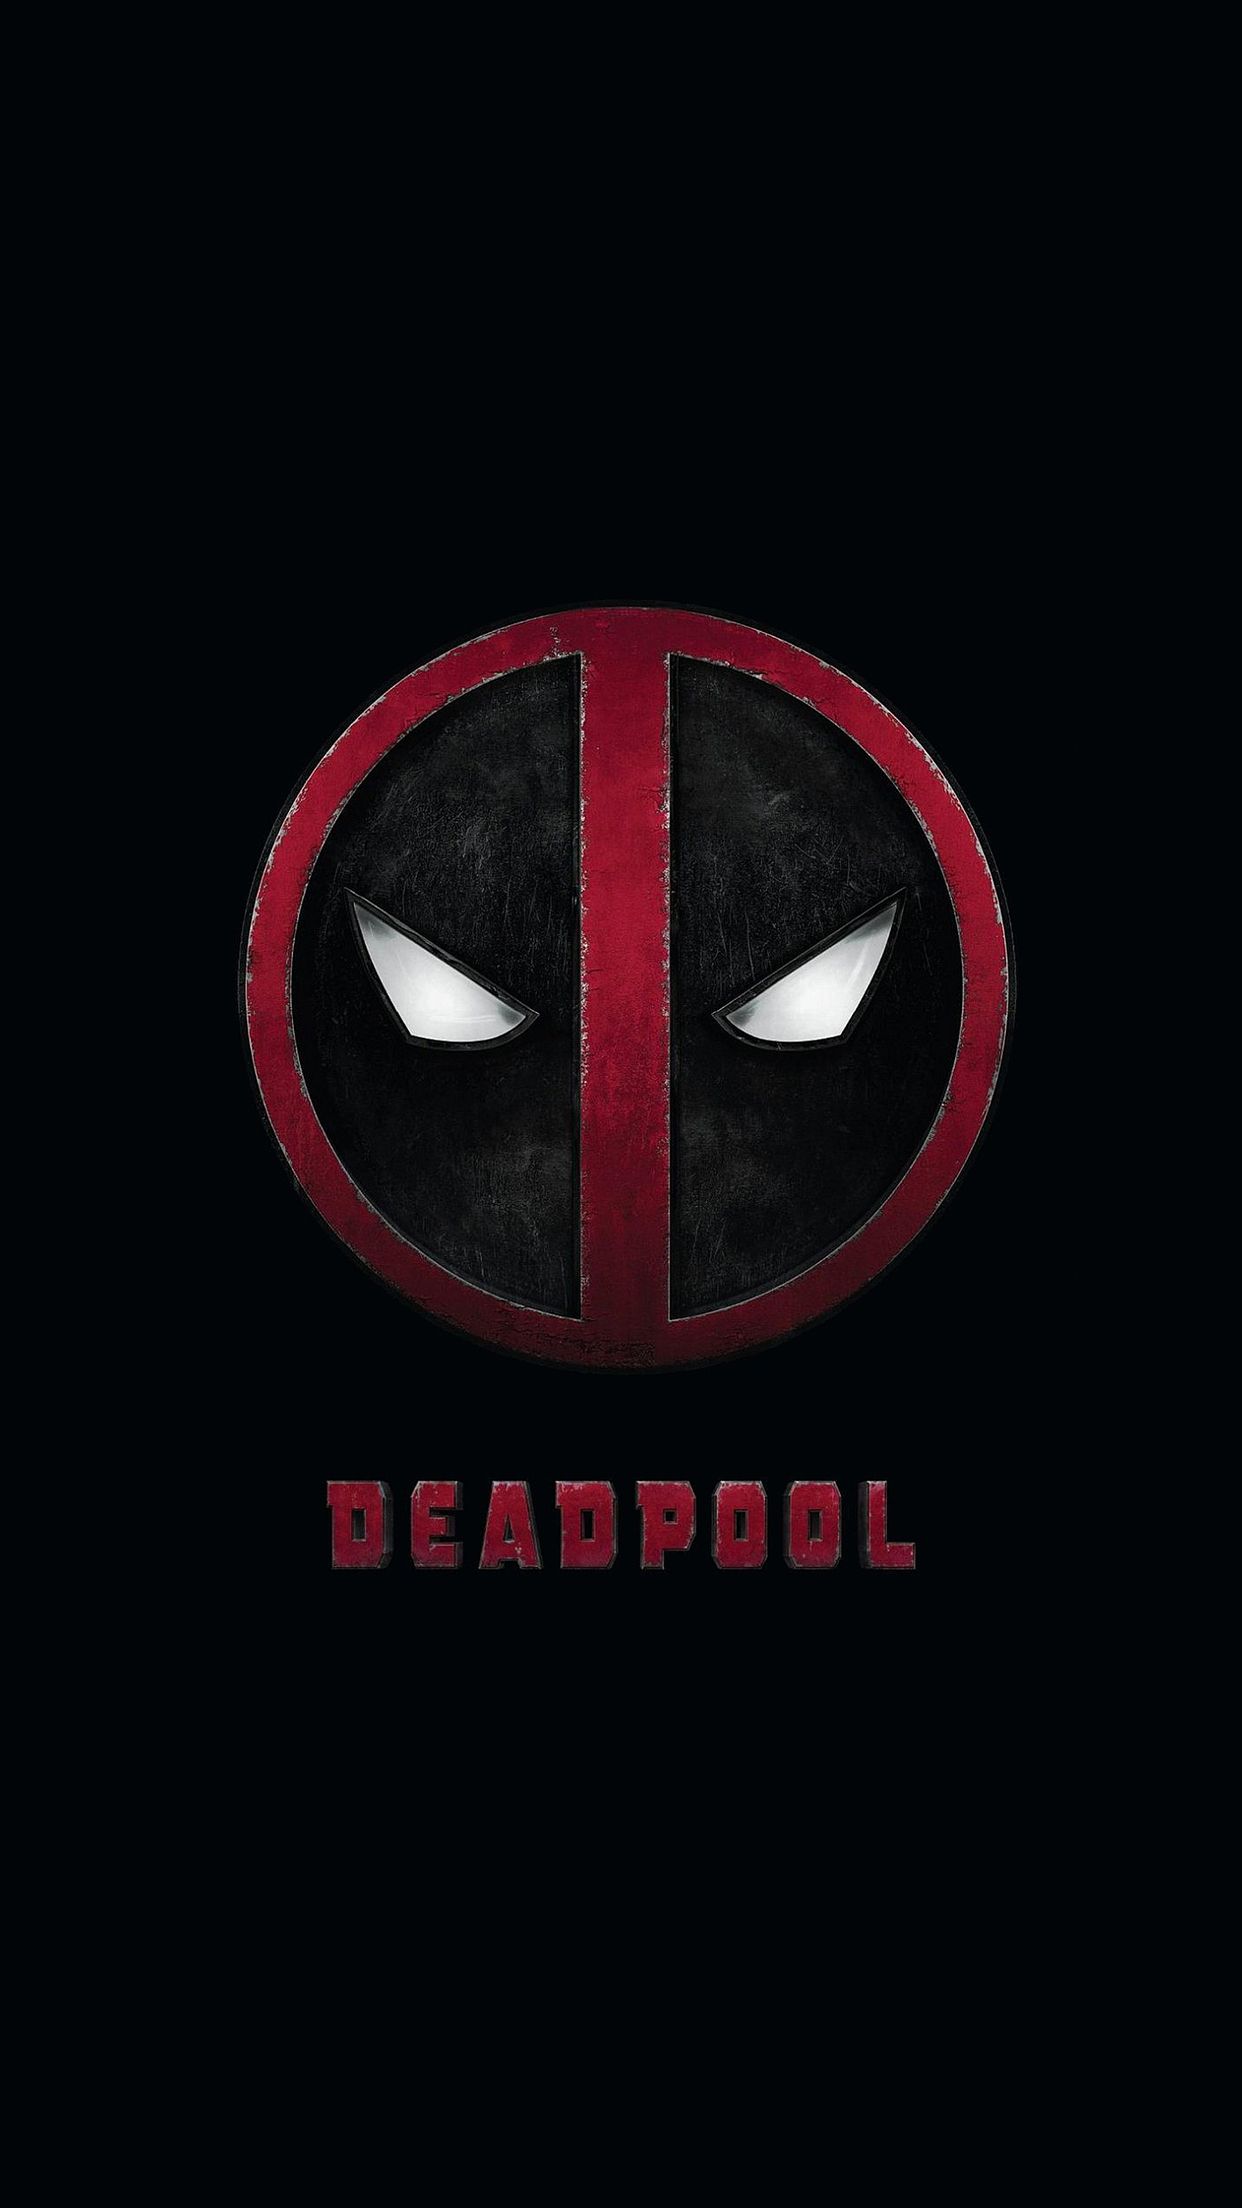 Deadpool game iphone 6 logo background wallpapers free | iPhone ...